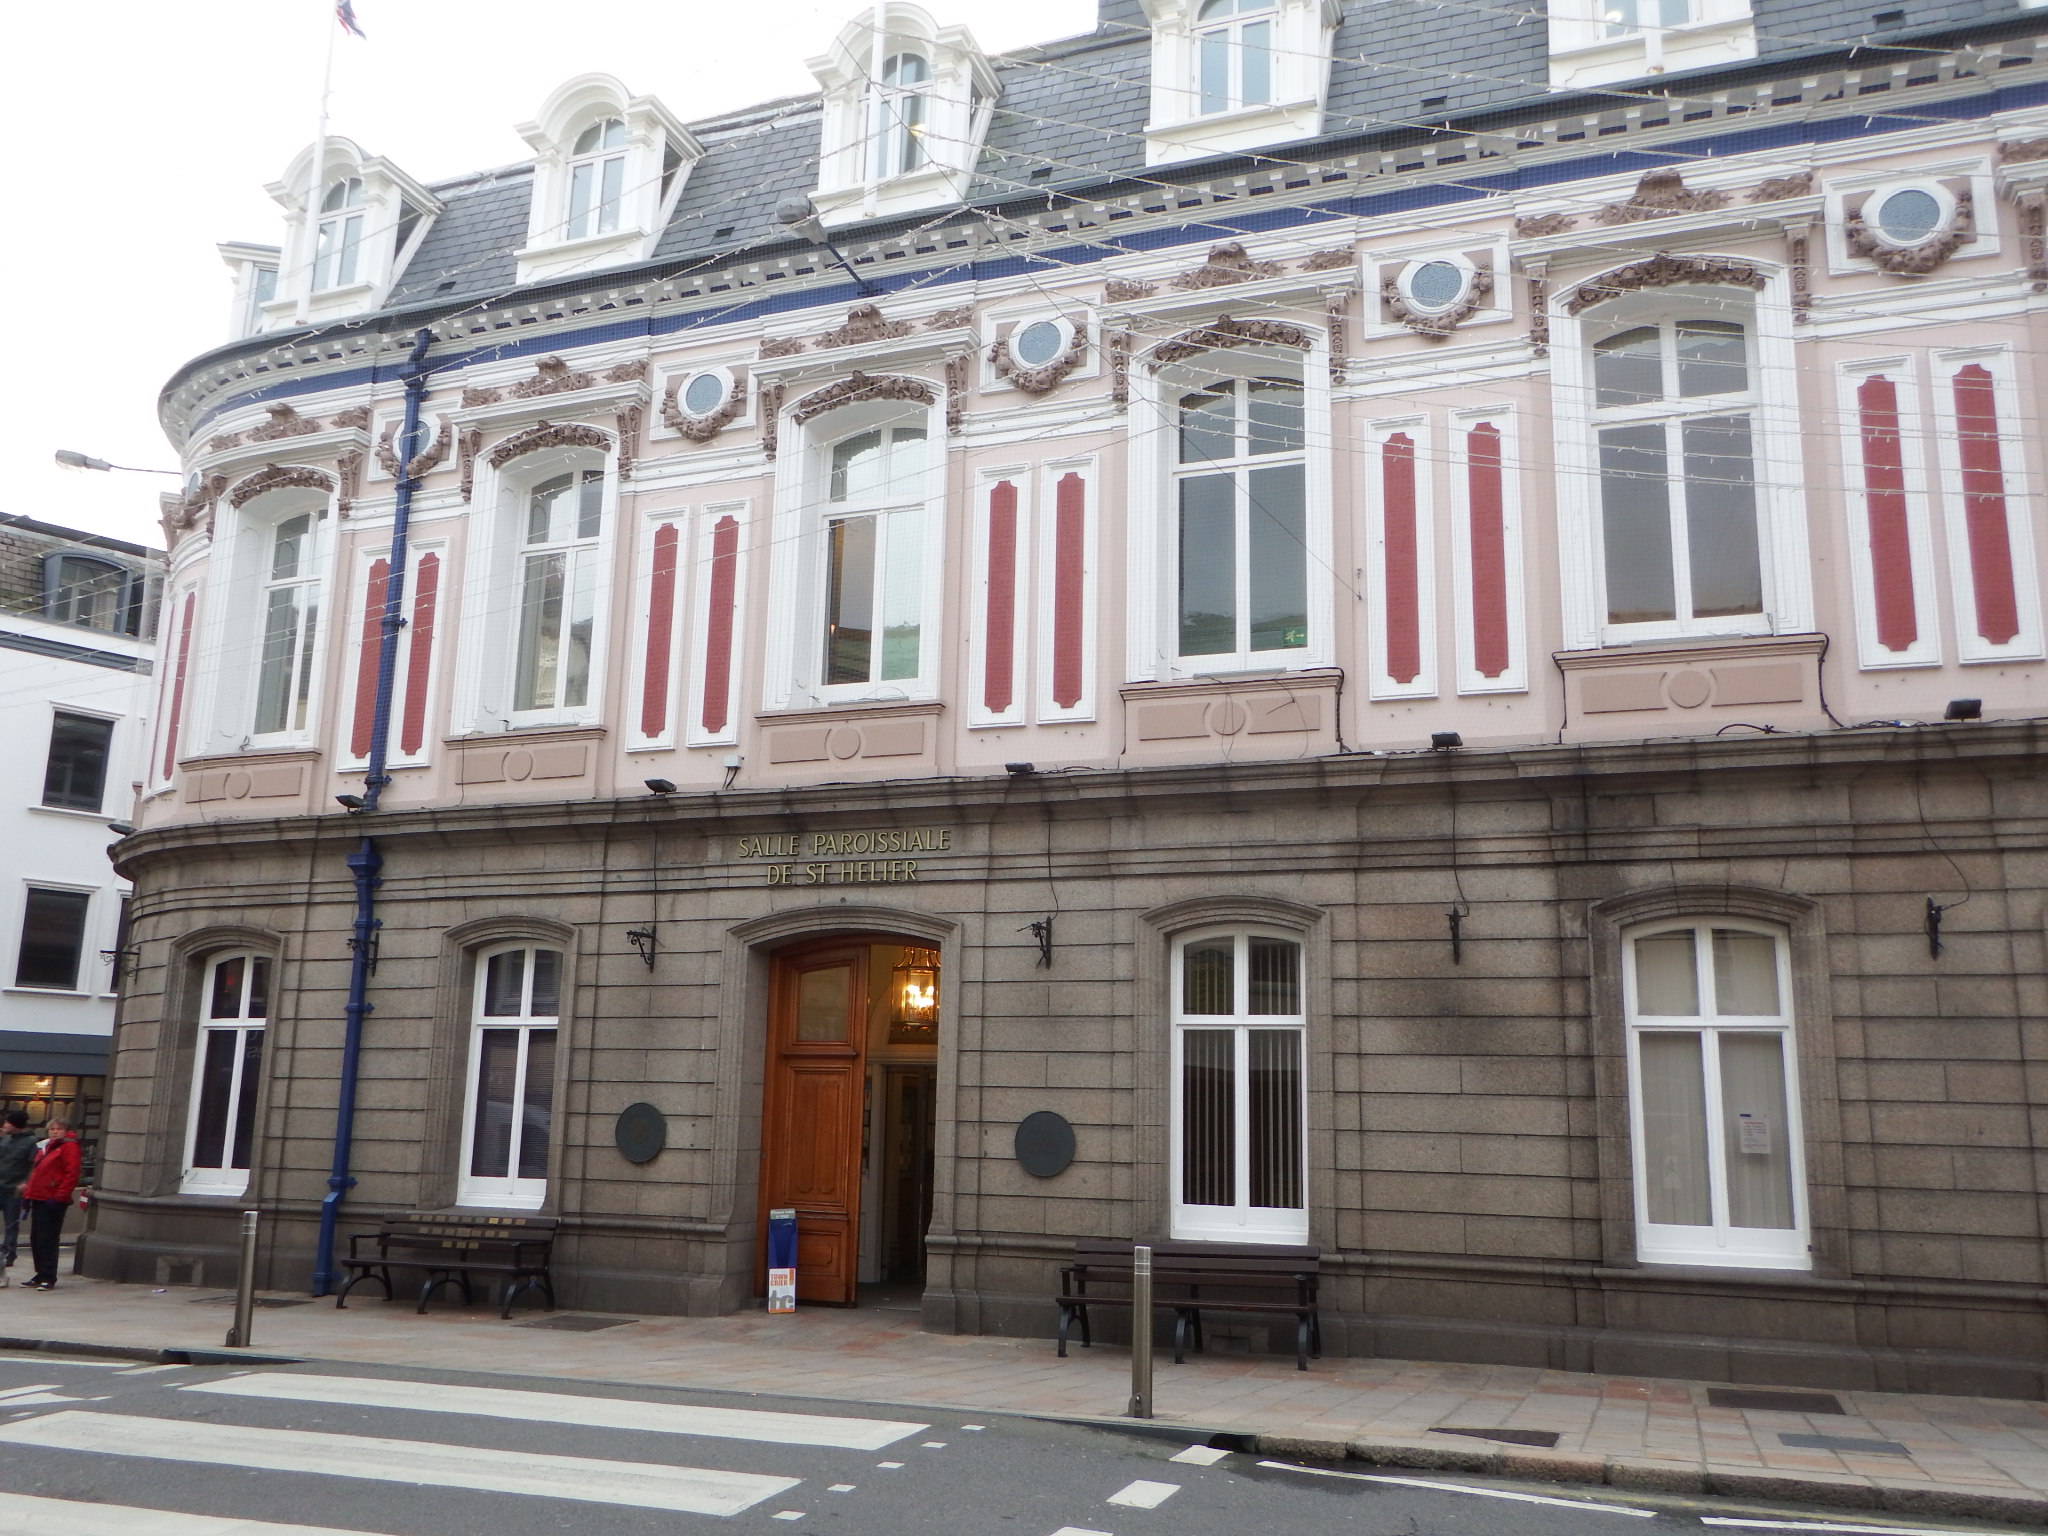 St Helier town hall